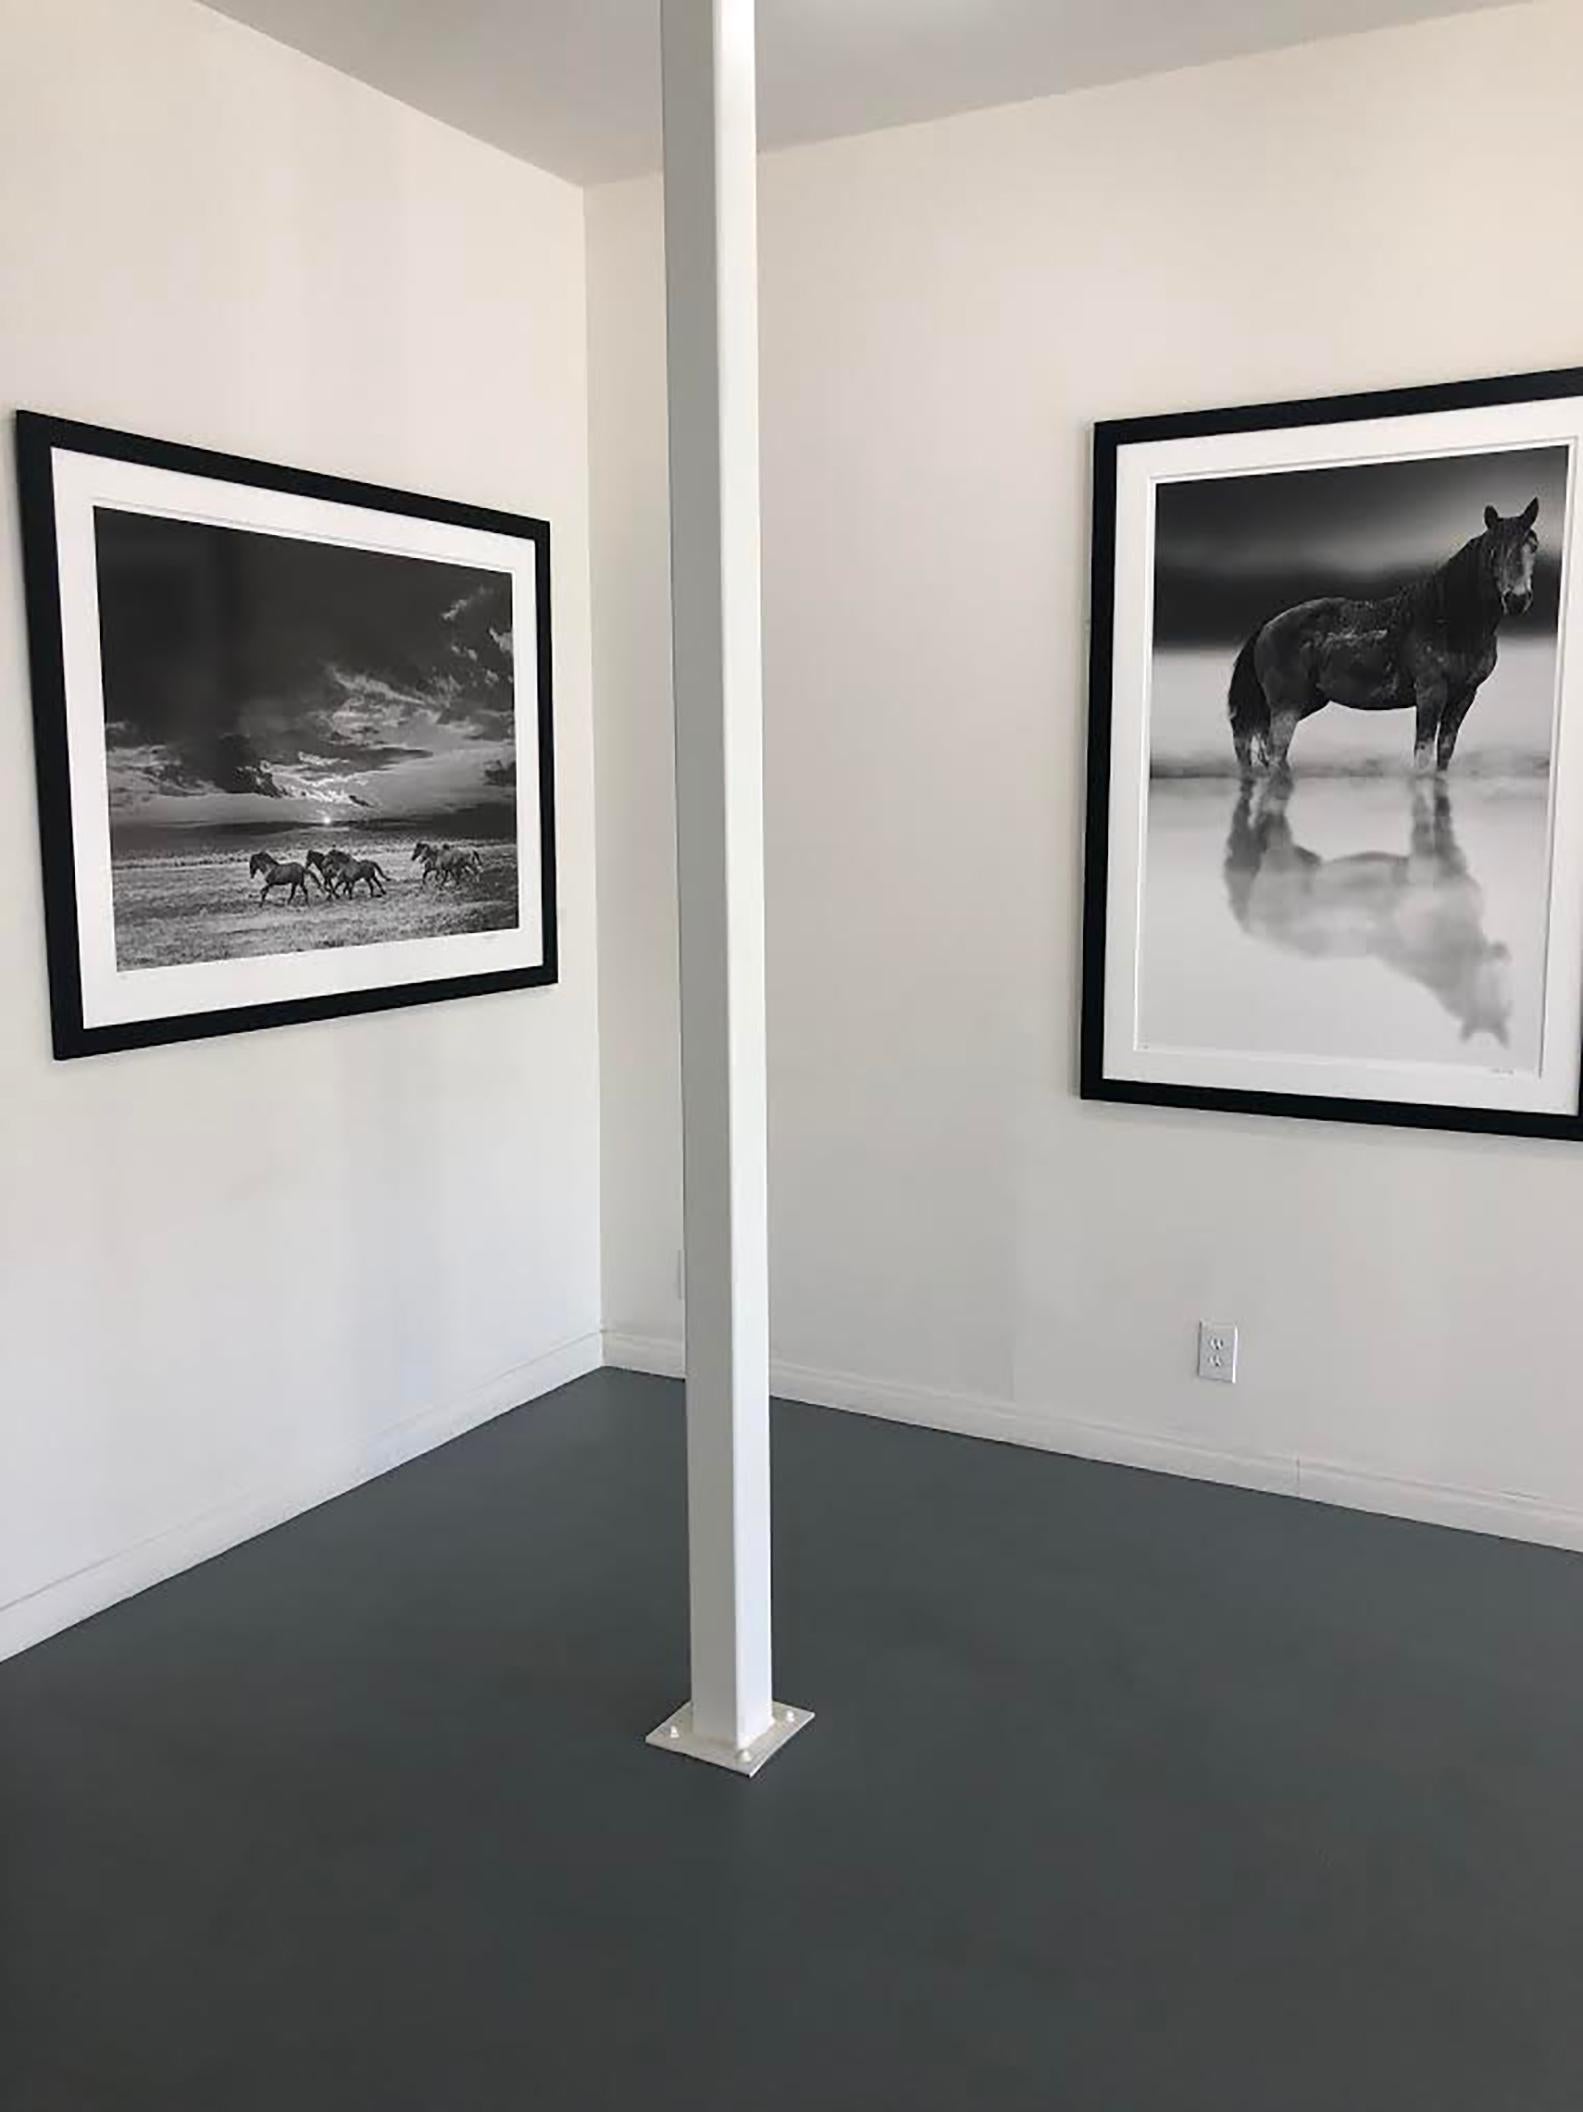 Chasing the Light 60x40- Contemporary Black and White Photography of Wild Horses - Print by Shane Russeck